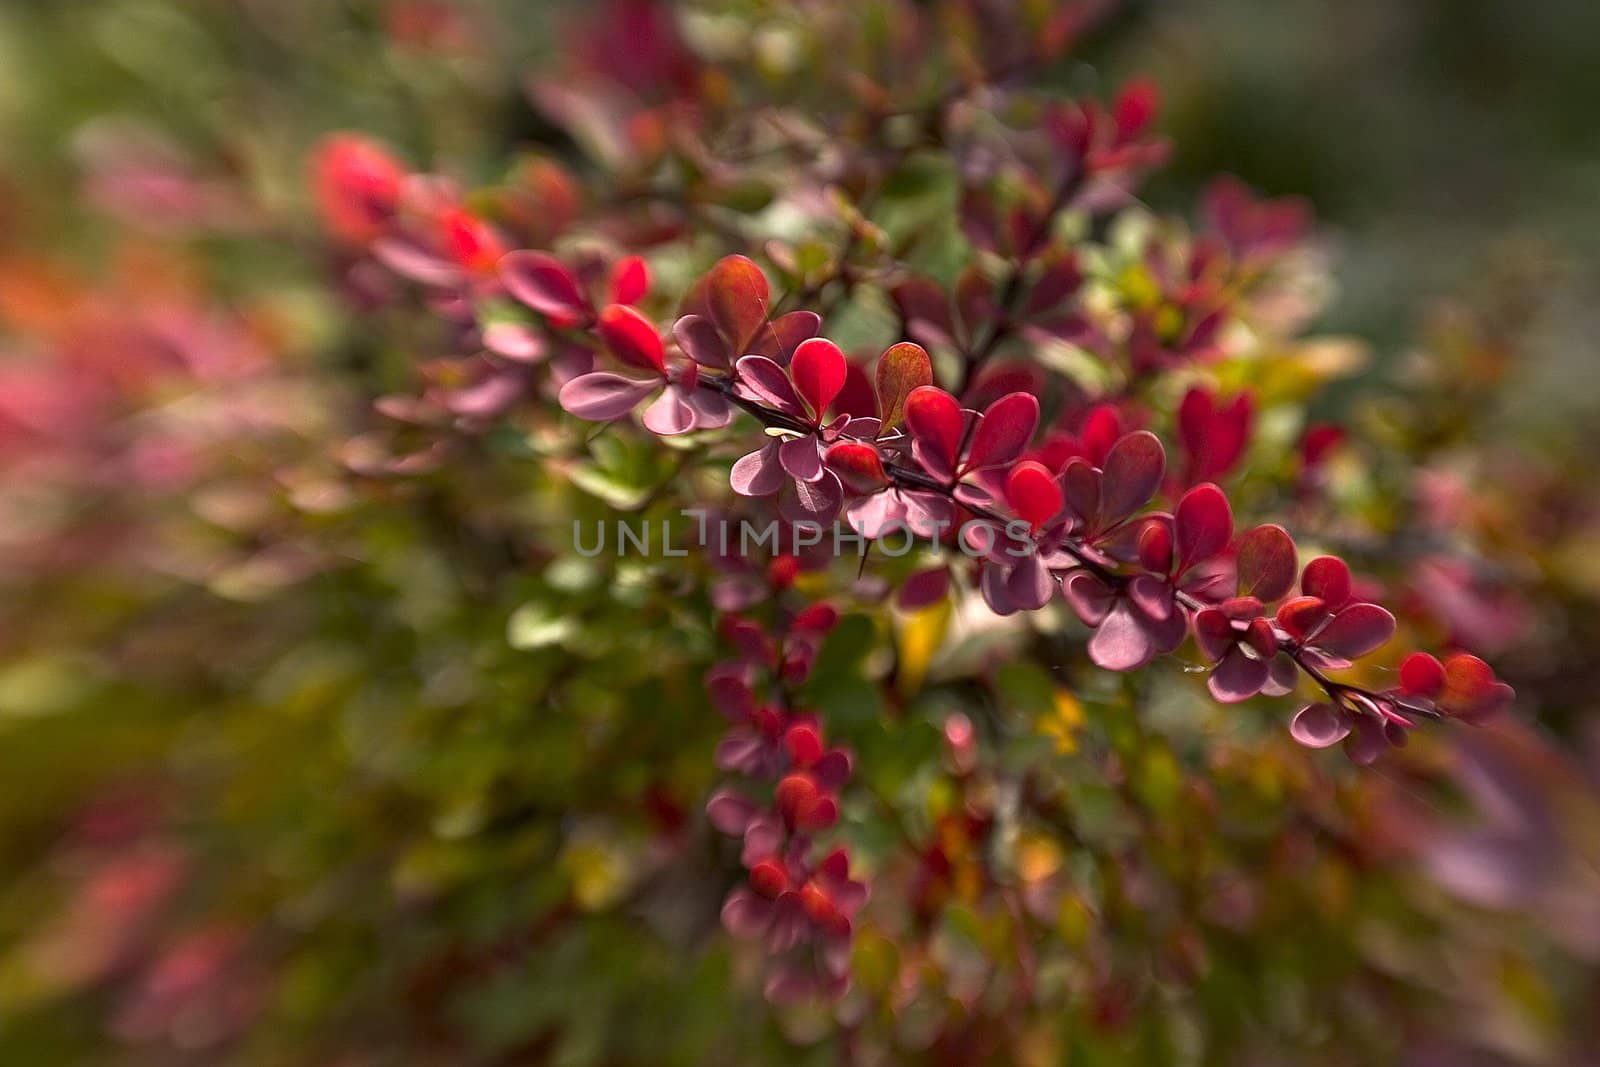 beautiful color effect of the blurred background lensbaby 

